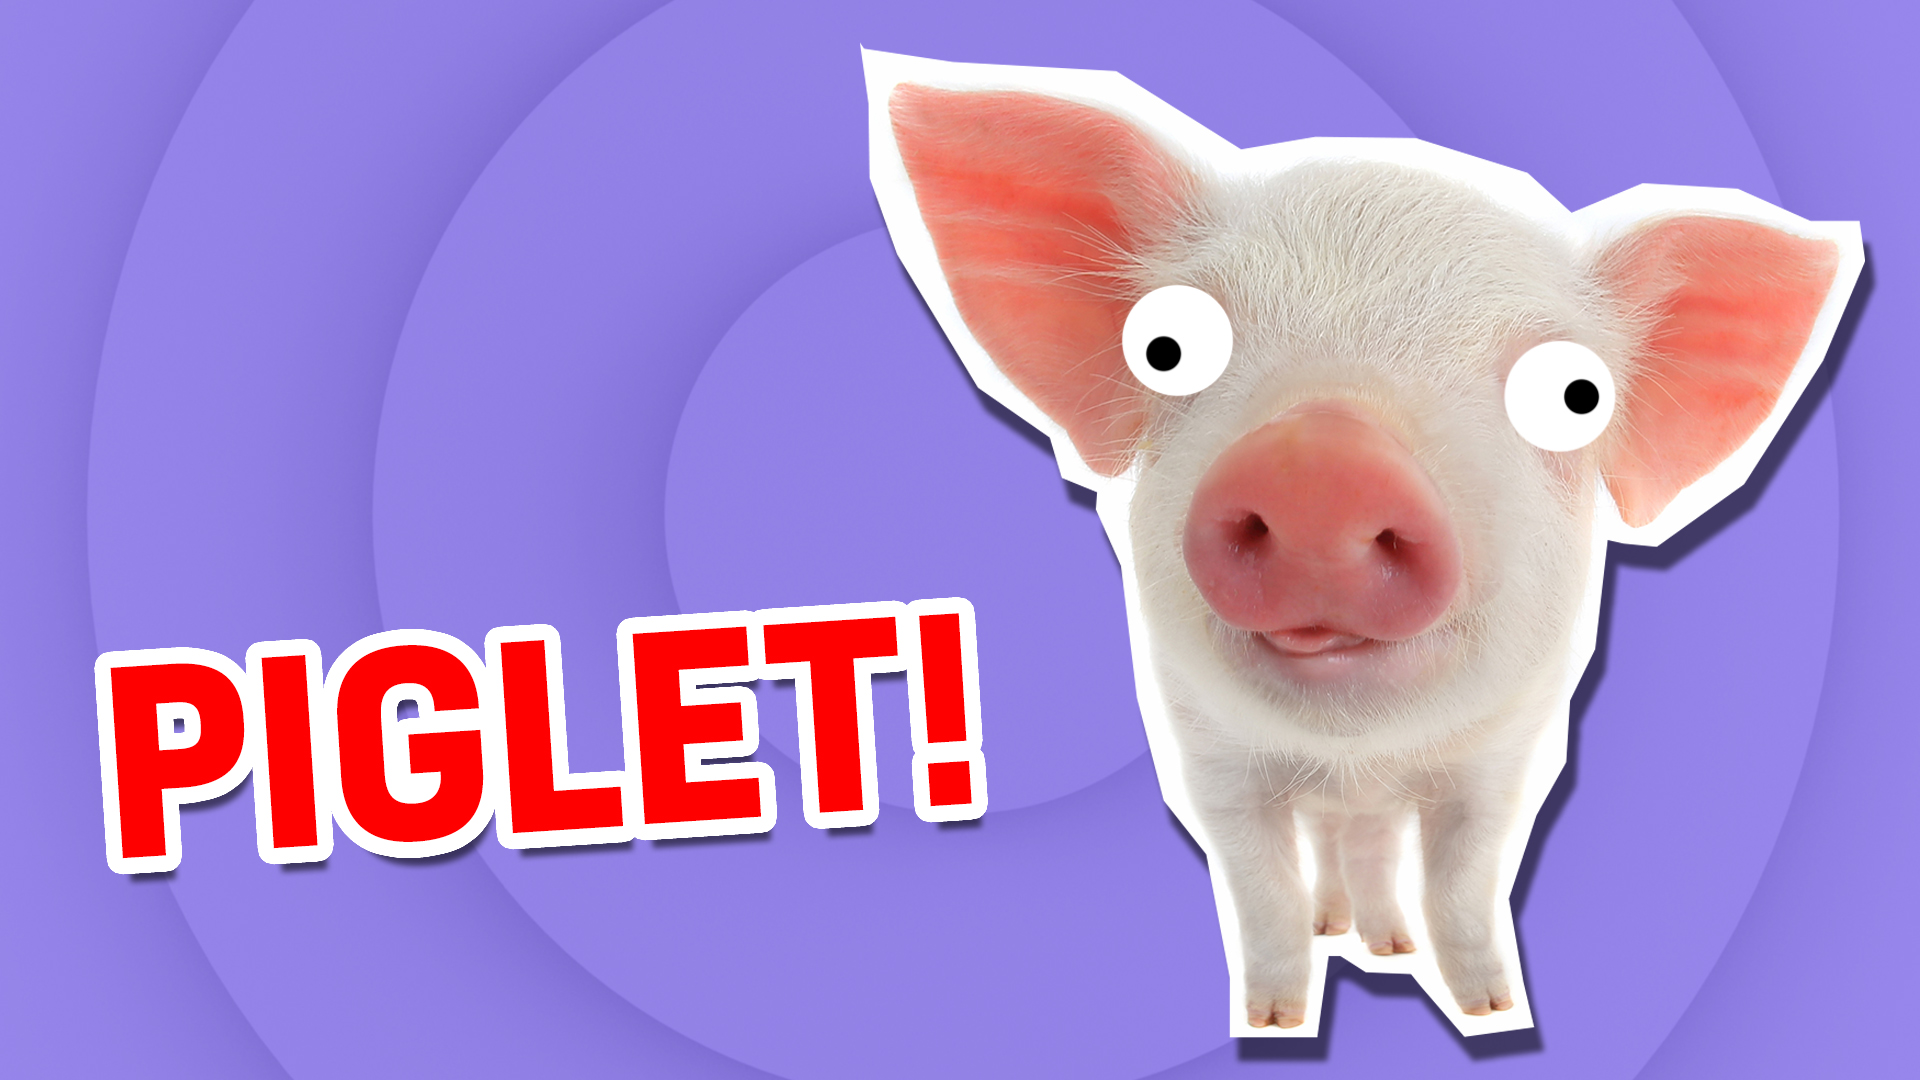 A piglet | What Cute Animal Are You?  | Which Cute Animal Are You?